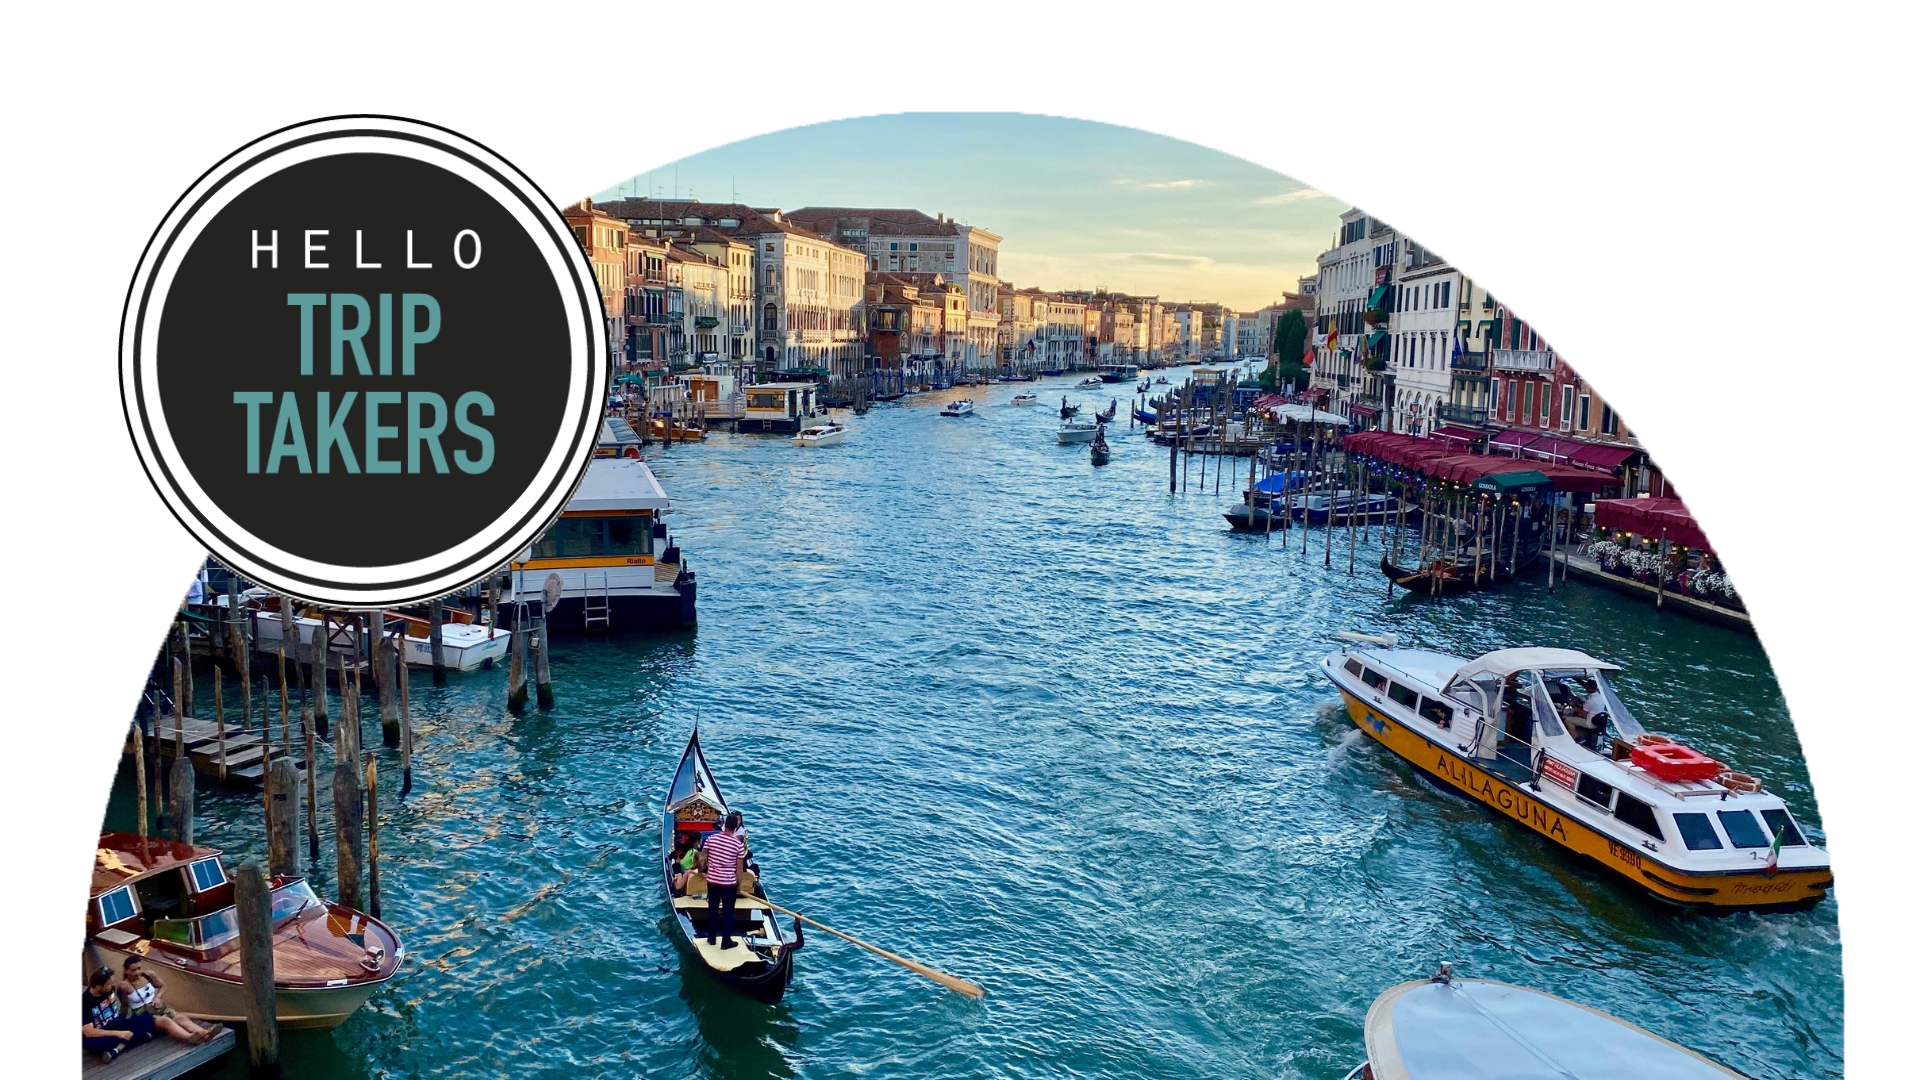 Plan your trip to Venice